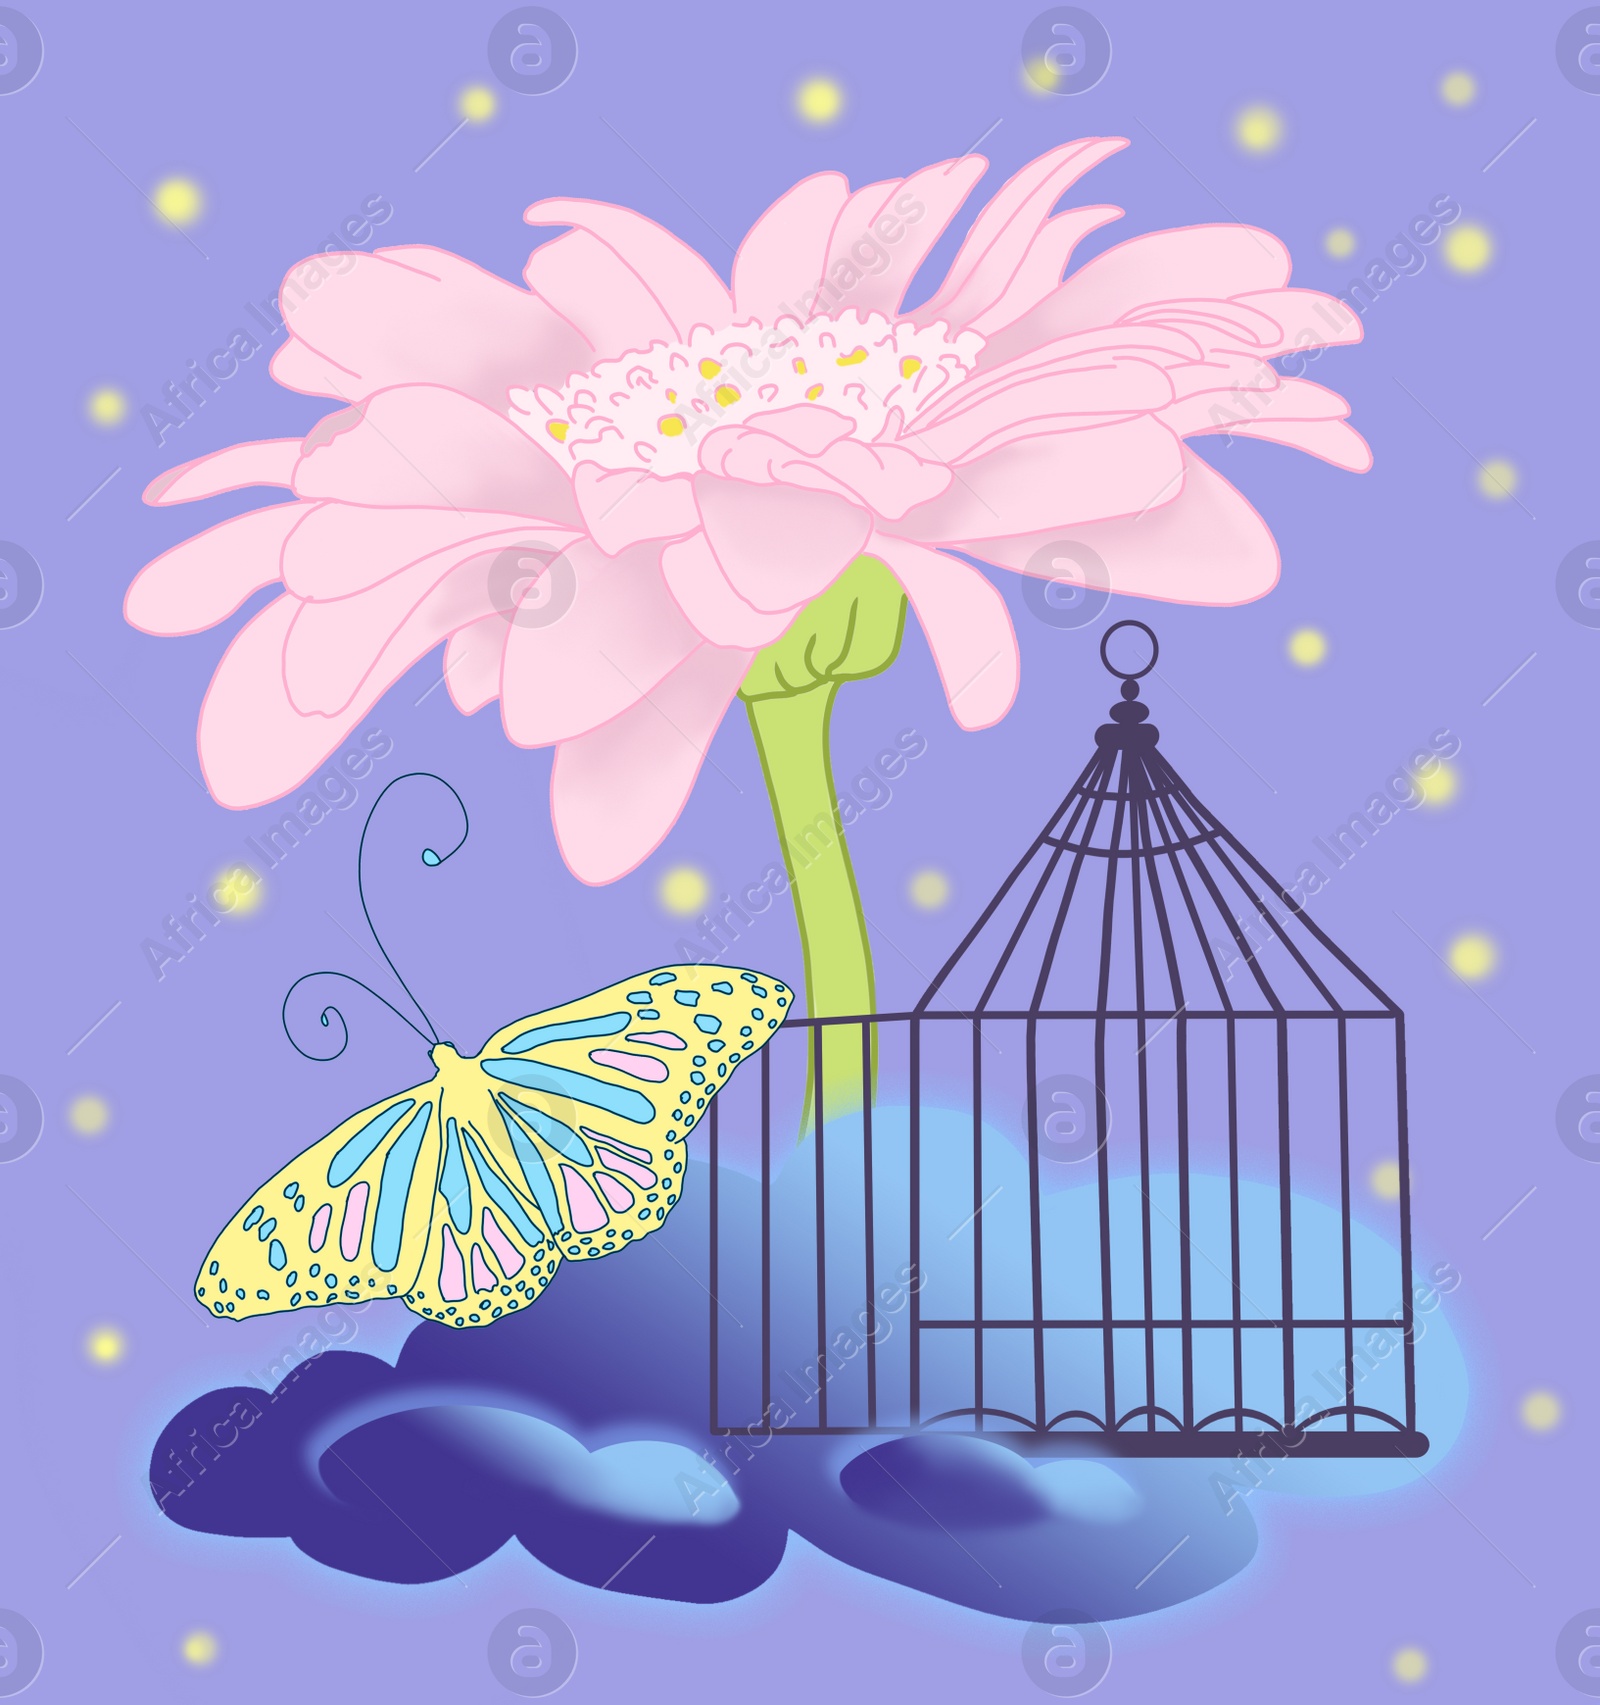 Illustration of Beautiful illustration demonstrating sense of freedom. Butterfly leaving cage